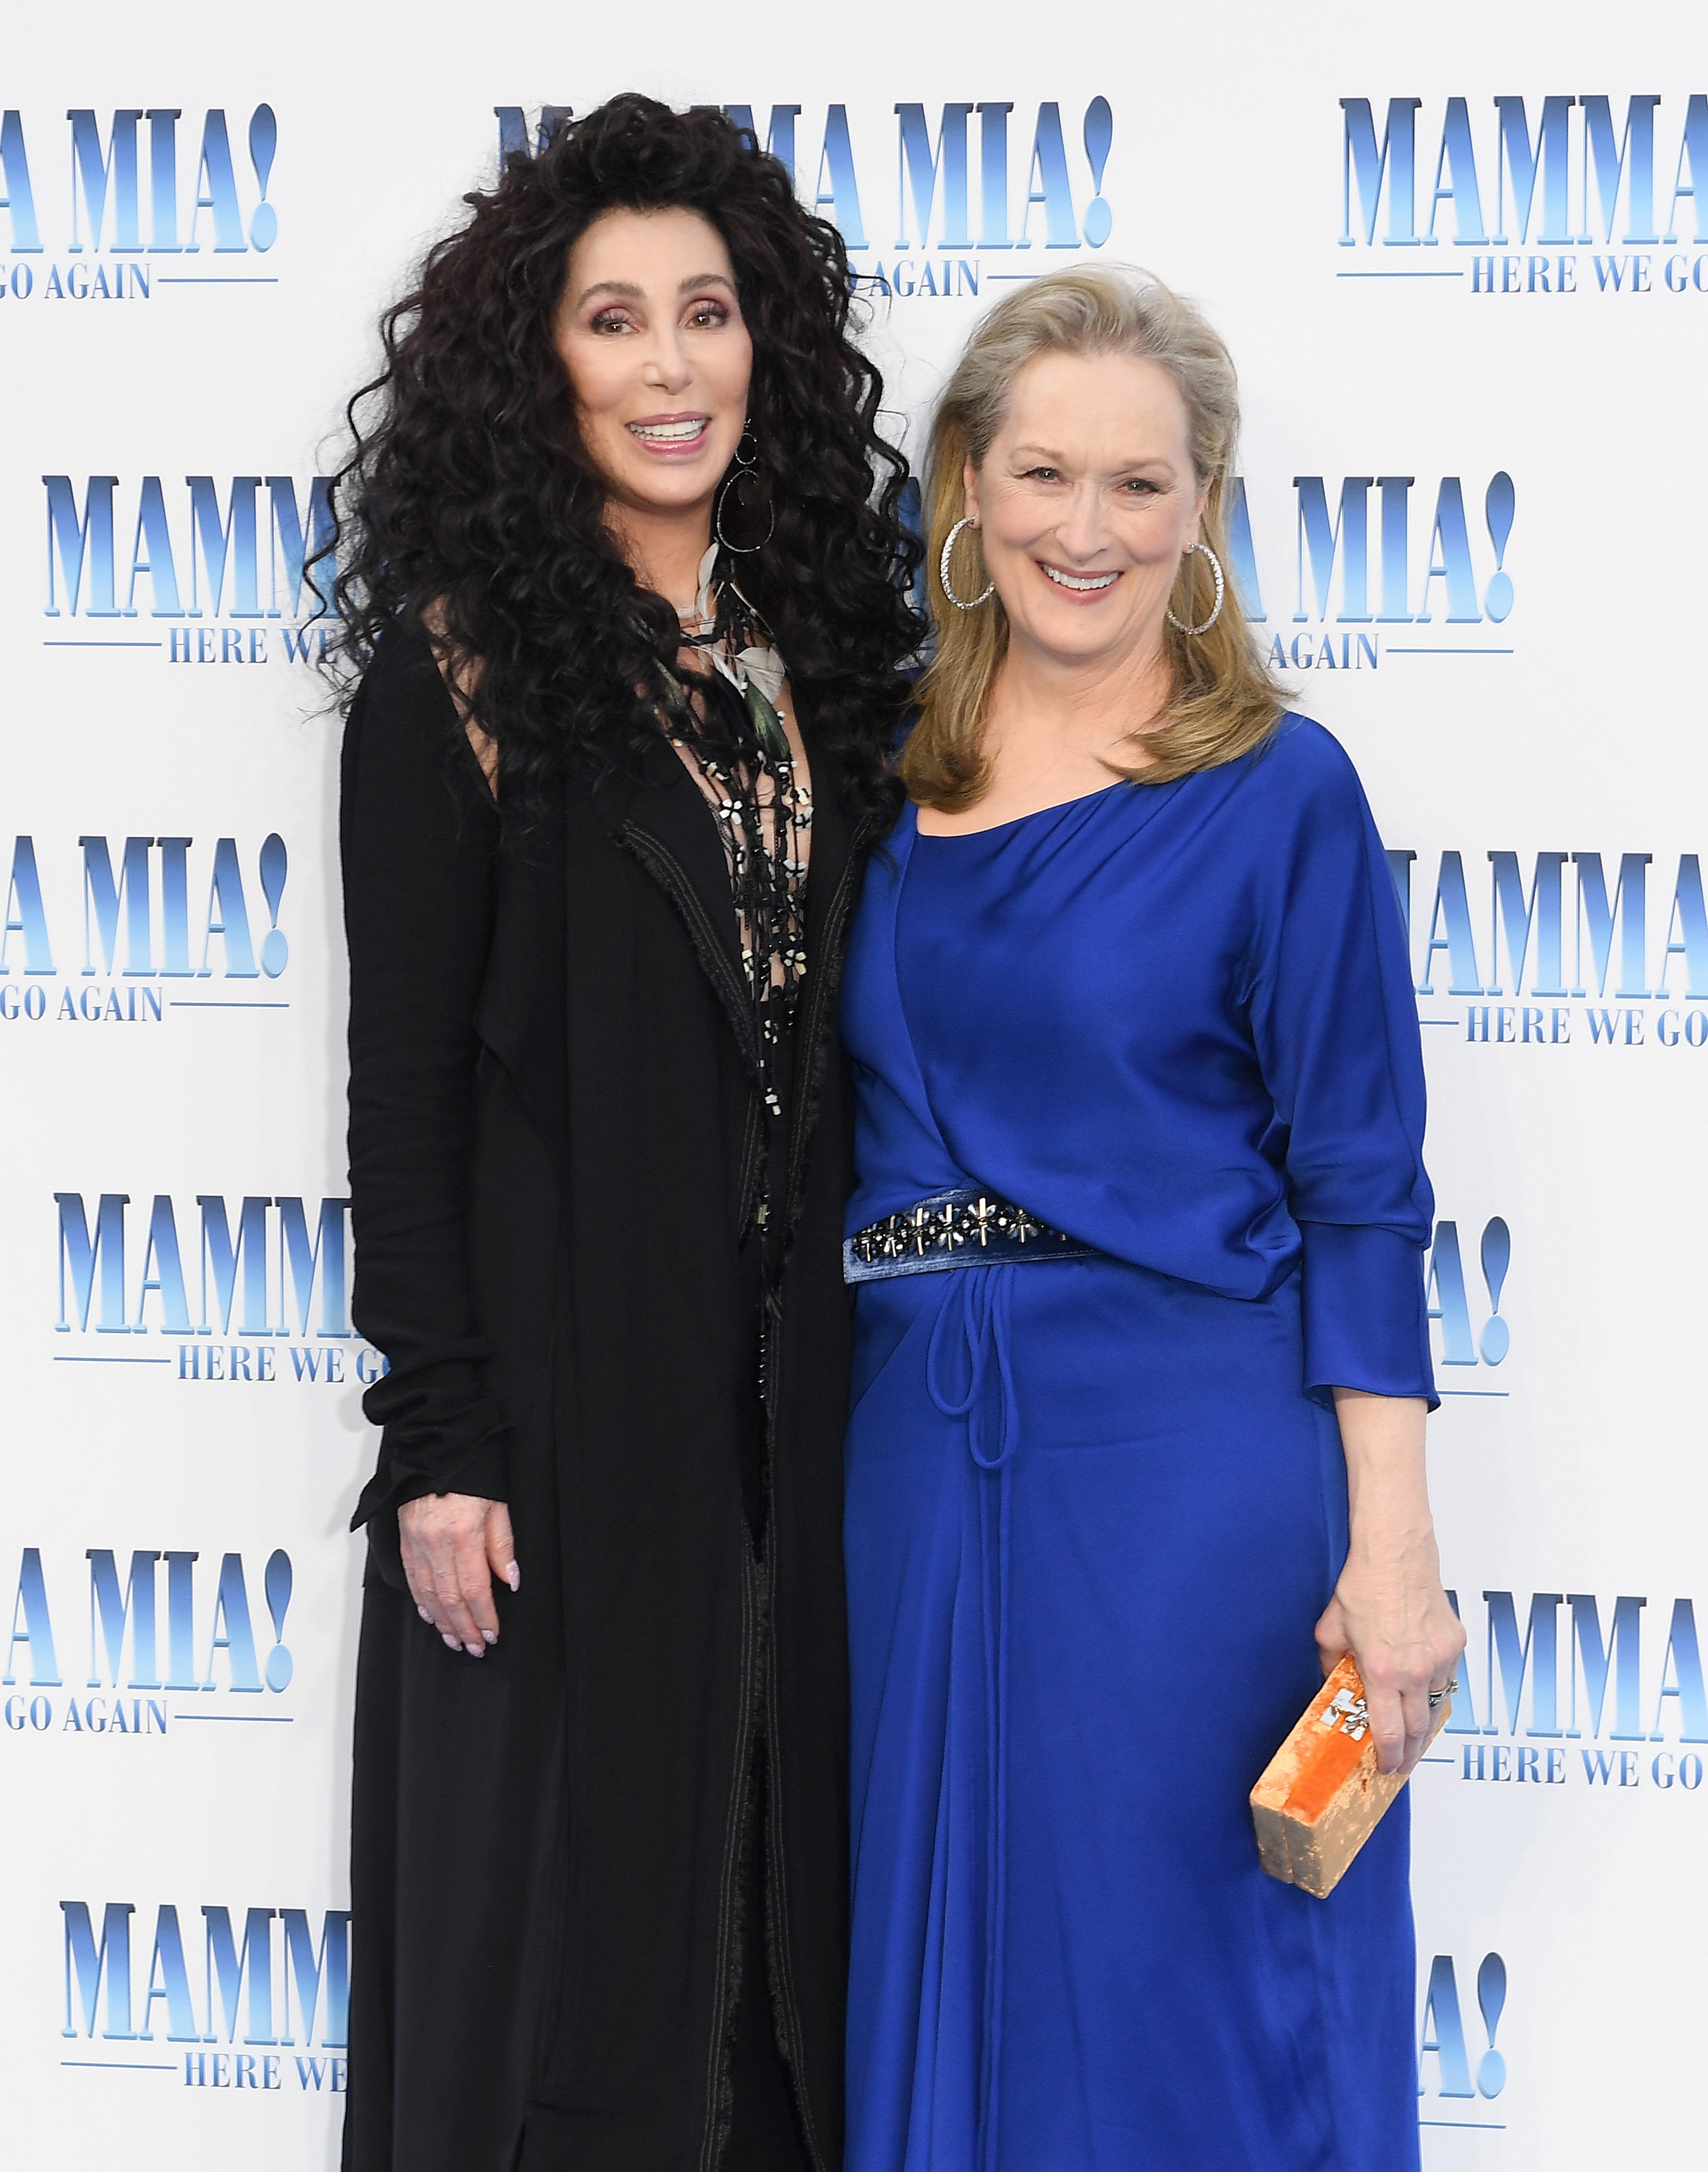 Cher and Meryl Streep attend the premiere of "Mamma Mia! Here We Go Again" in London, England on July 16, 2018 | Photo: Getty Images